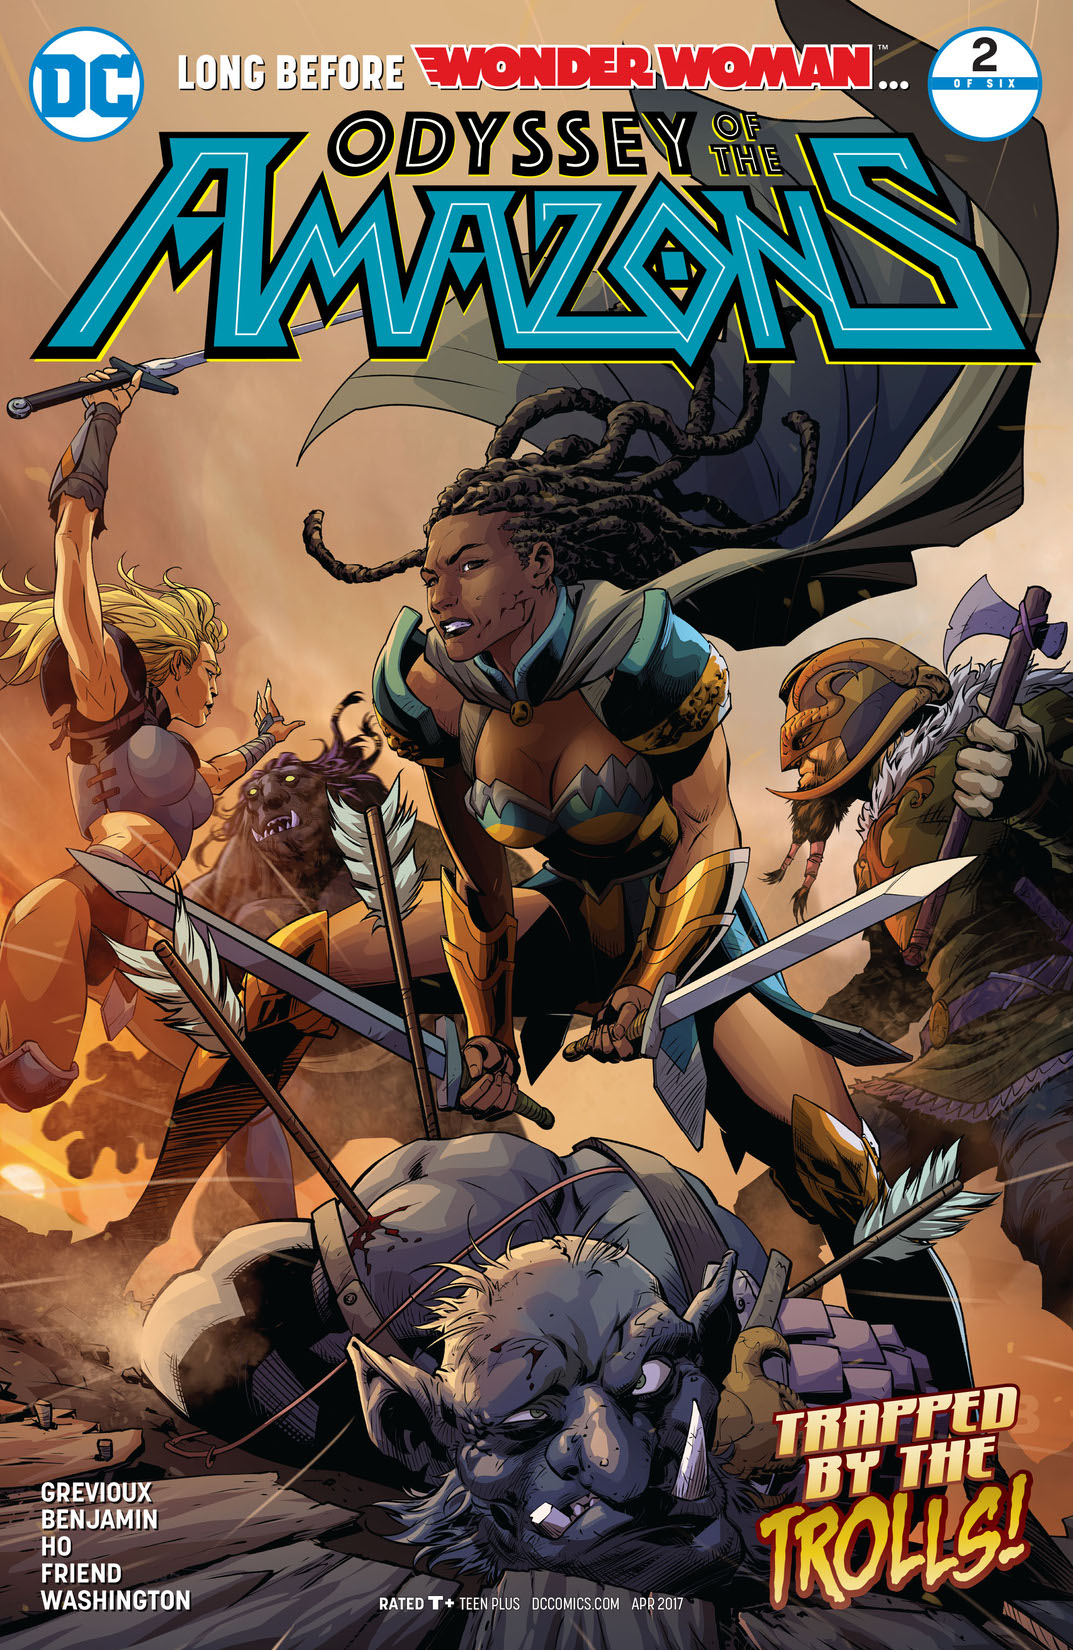 The Odyssey of the Amazons #2 preview images